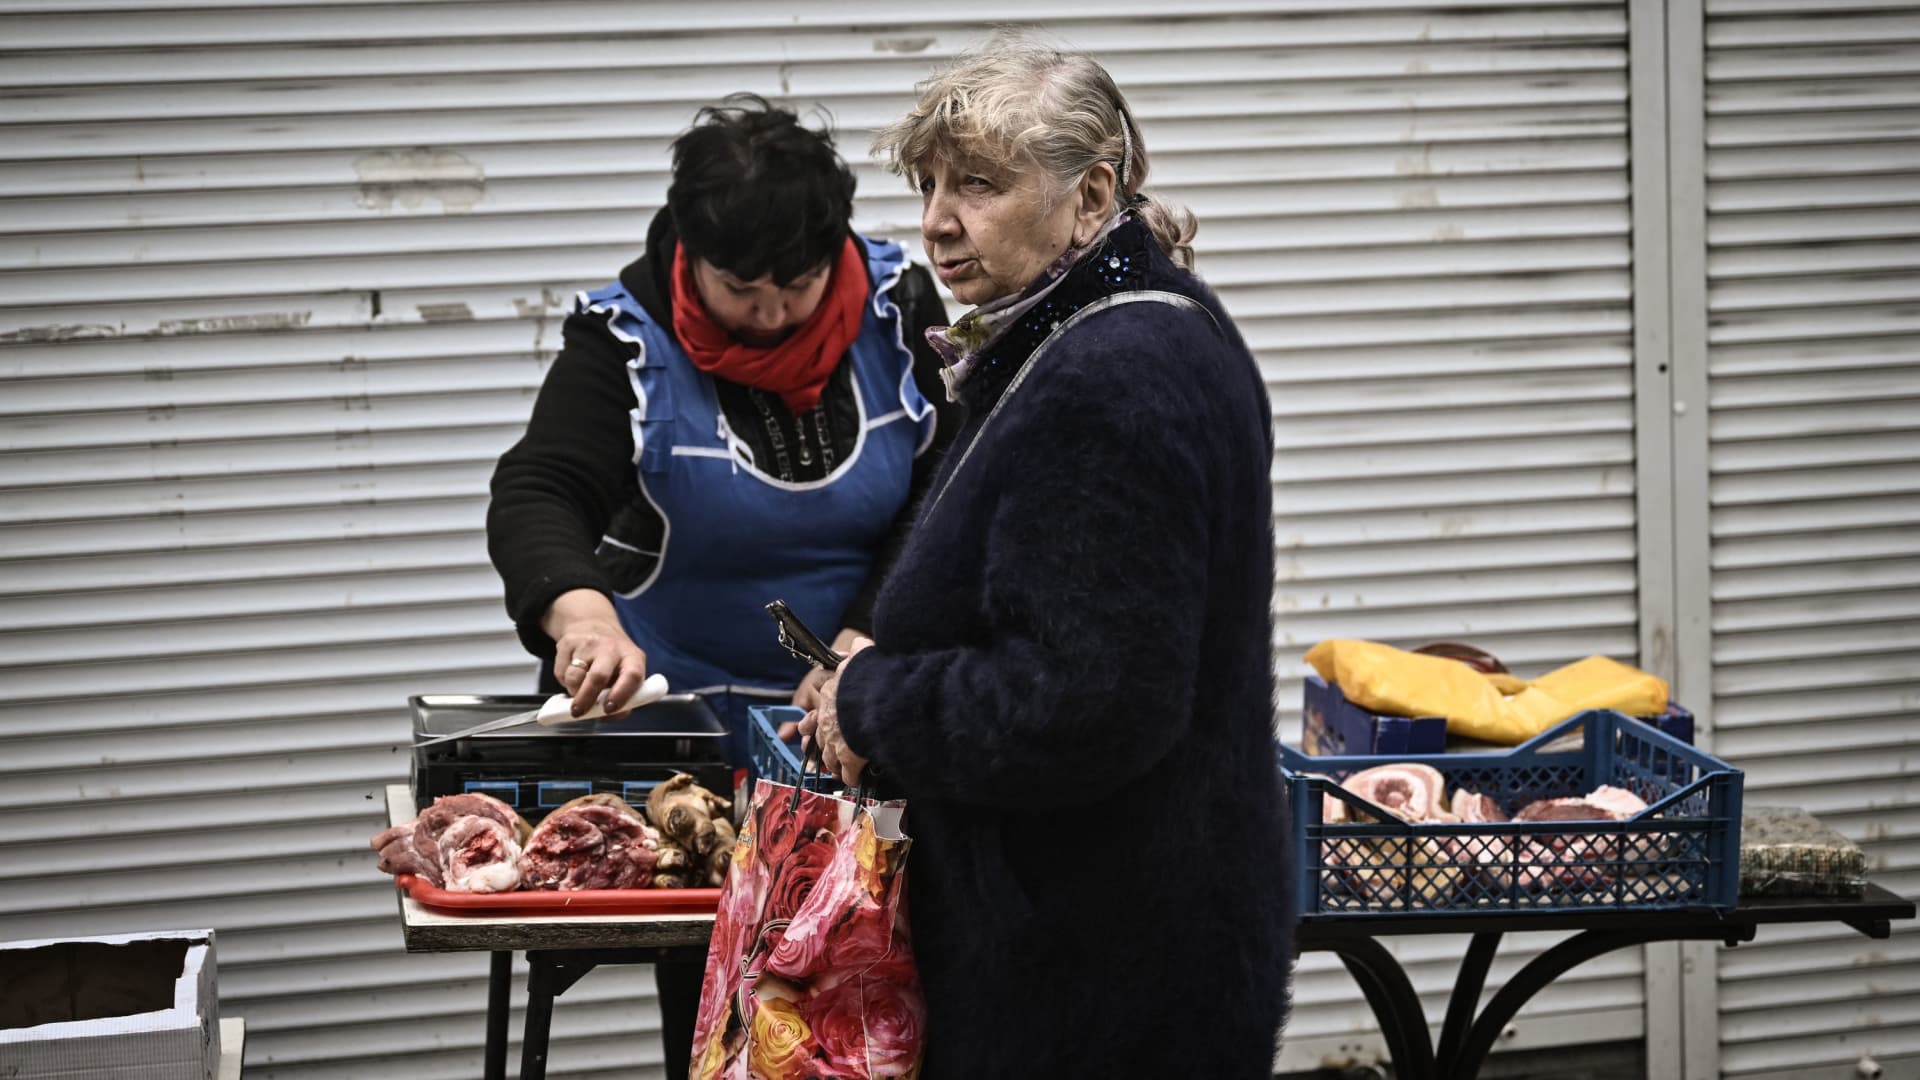 A woman buys meat from a street vendor in the city of Soledar, in the eastern Ukrainian region of Donbas on May 28, 2022.